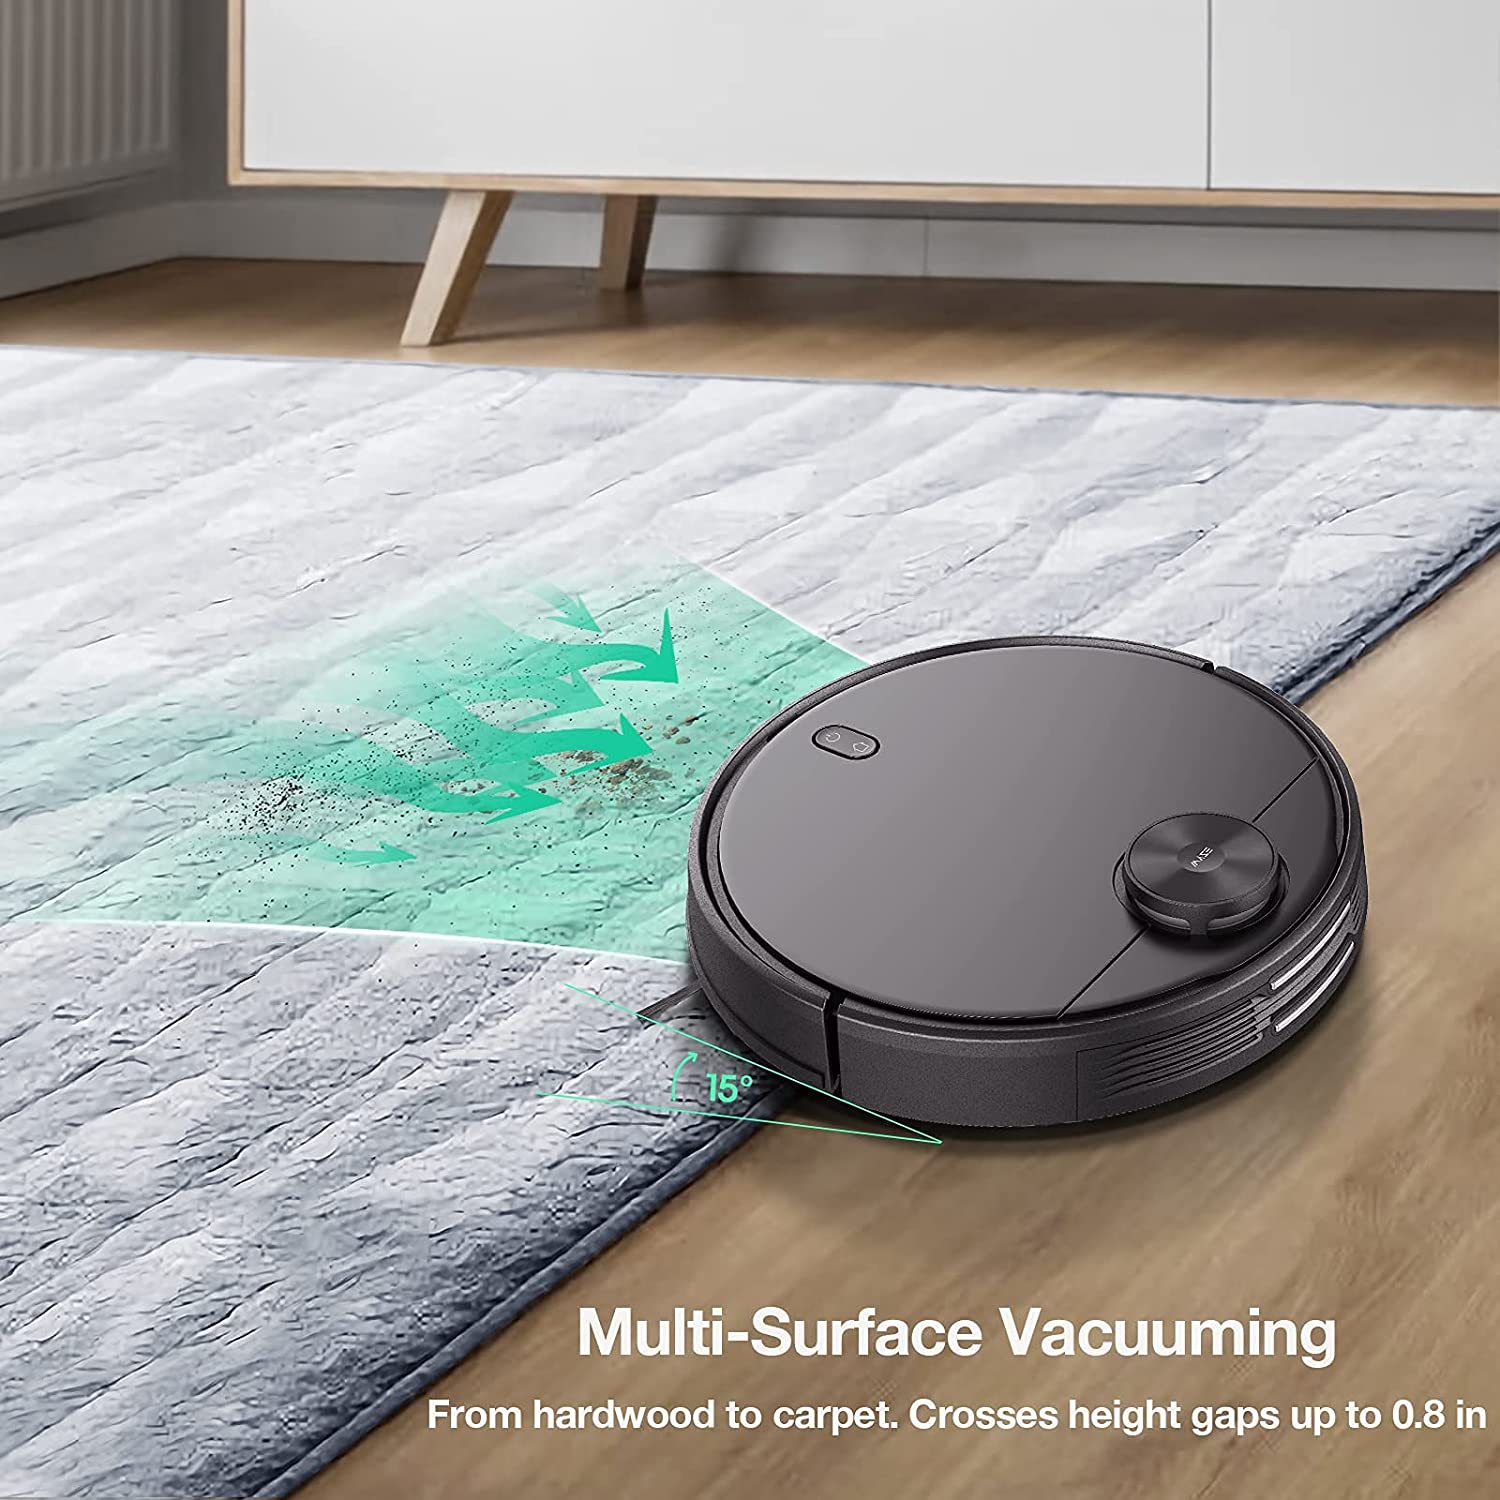 How Well Do Robot Vacuums Work on Different Floor Types? - Northern  Colorado Carpets